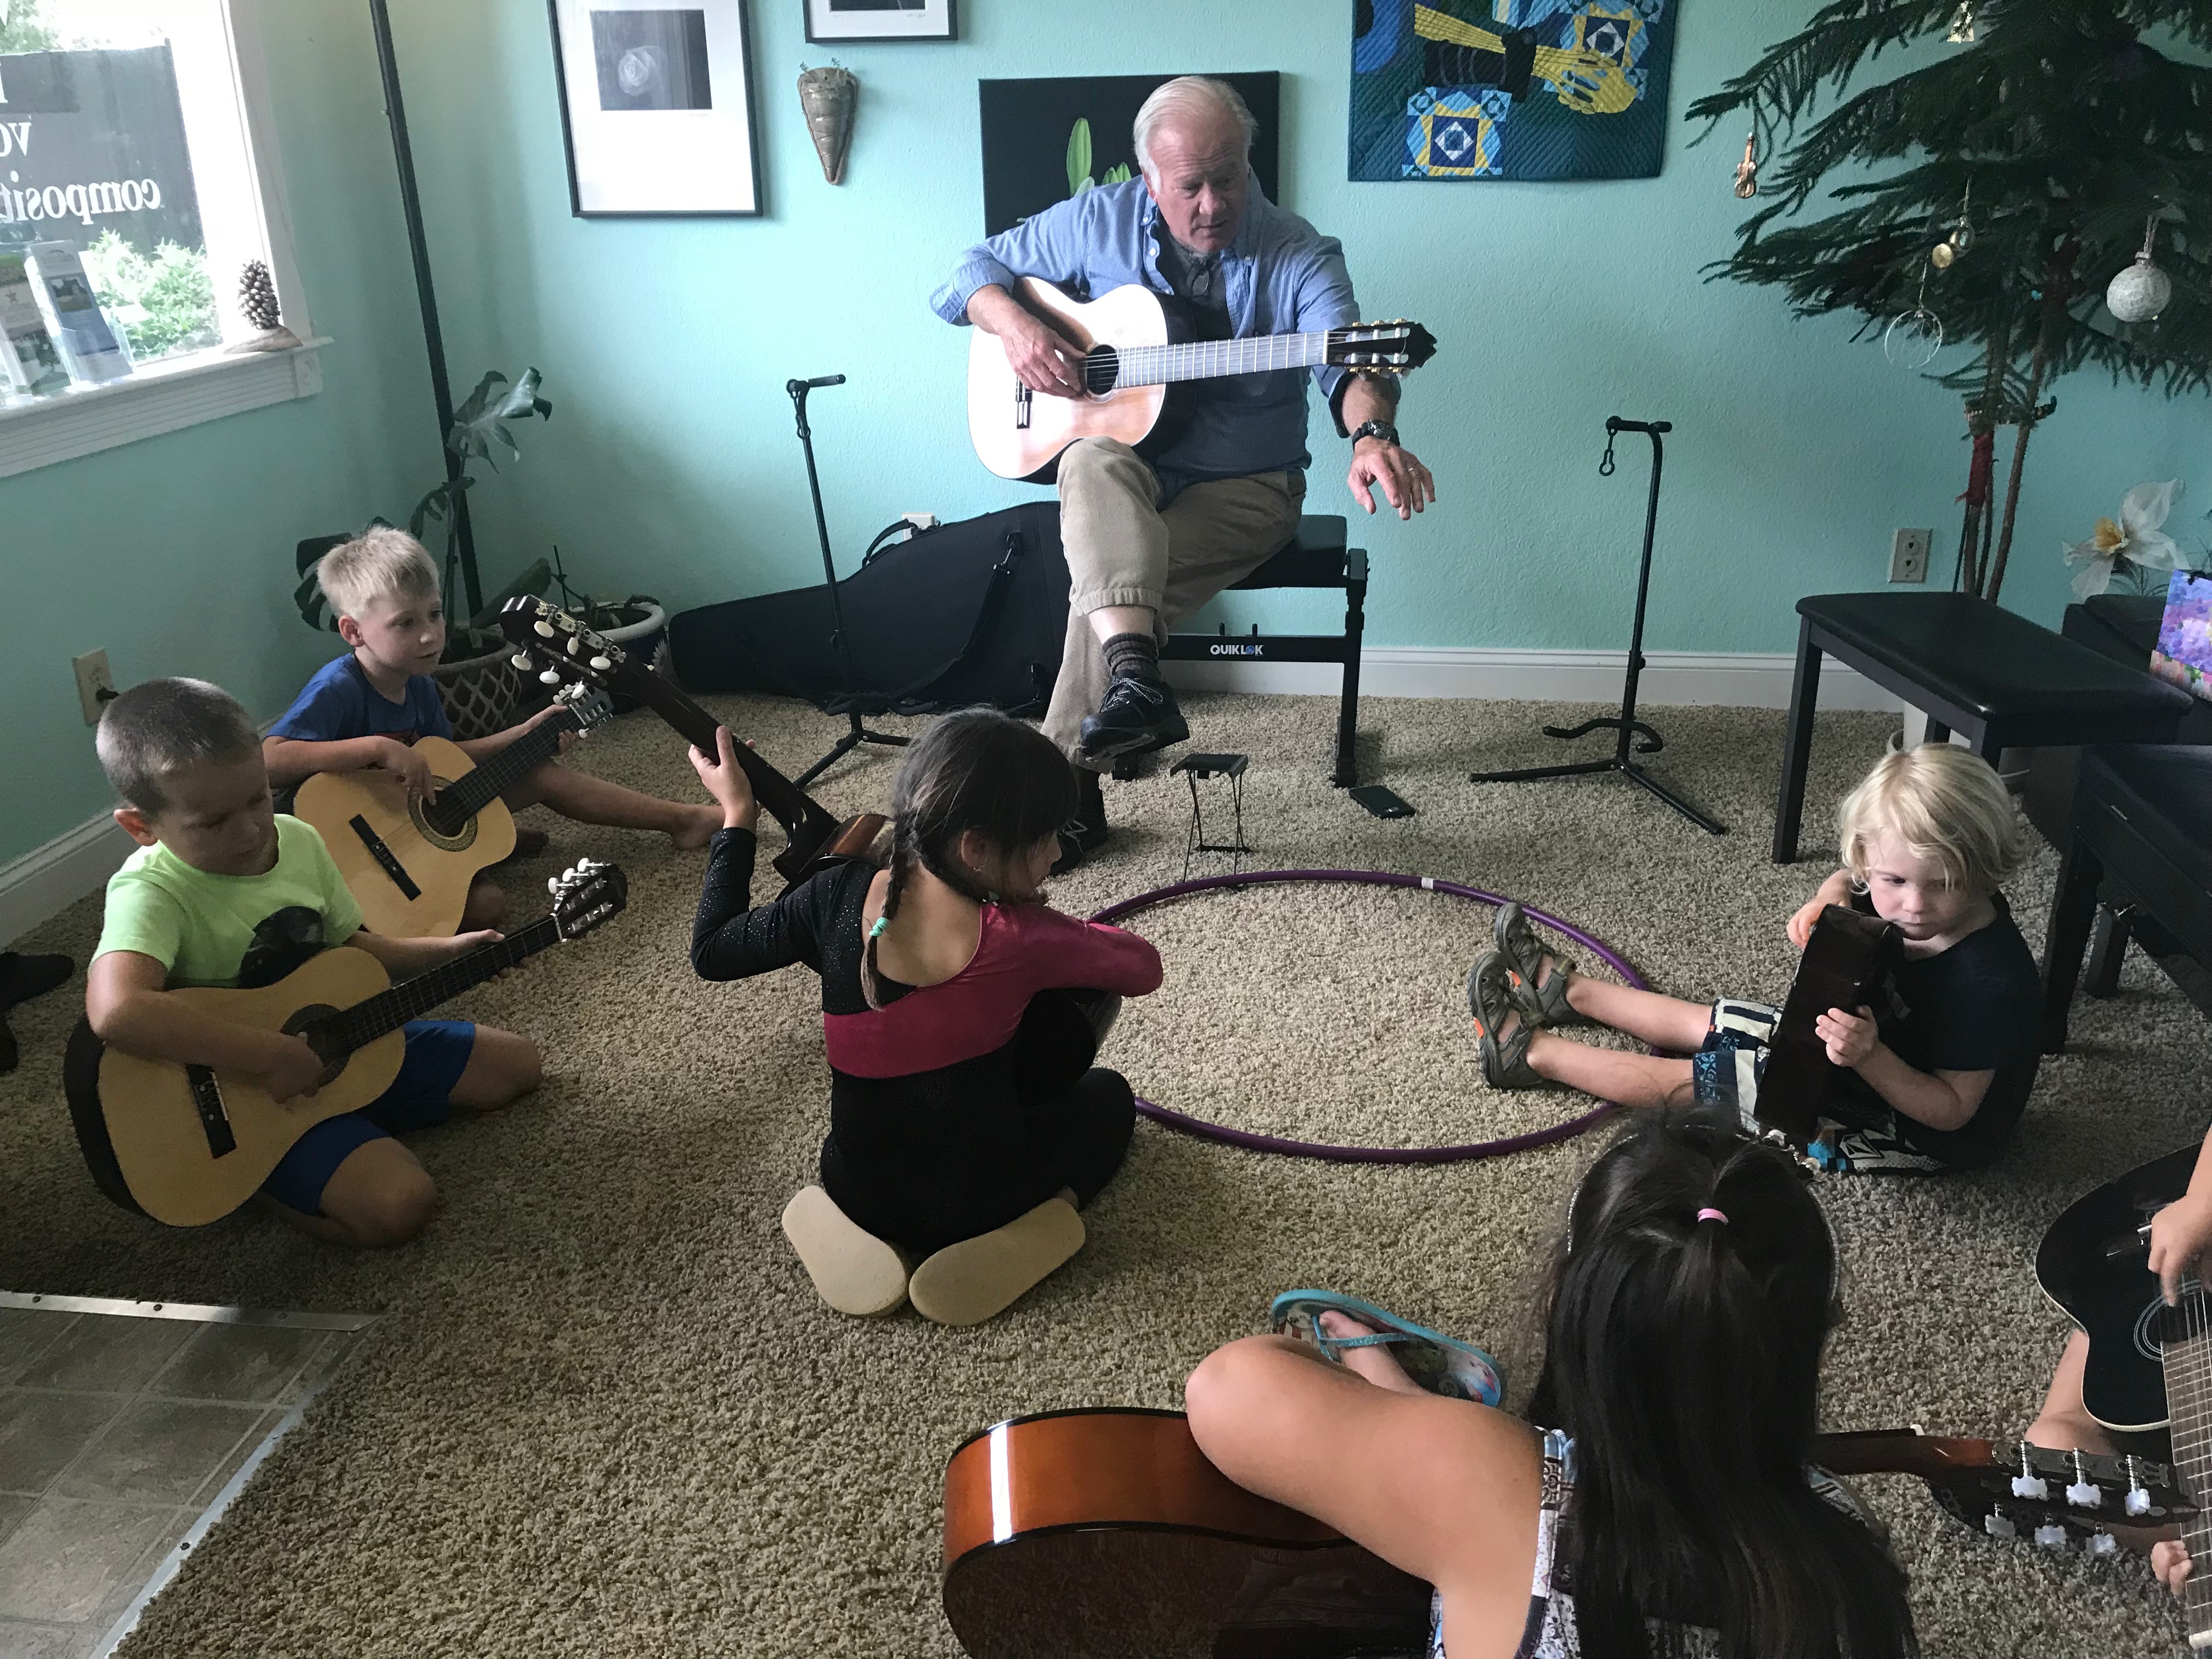 Small children learning guitar